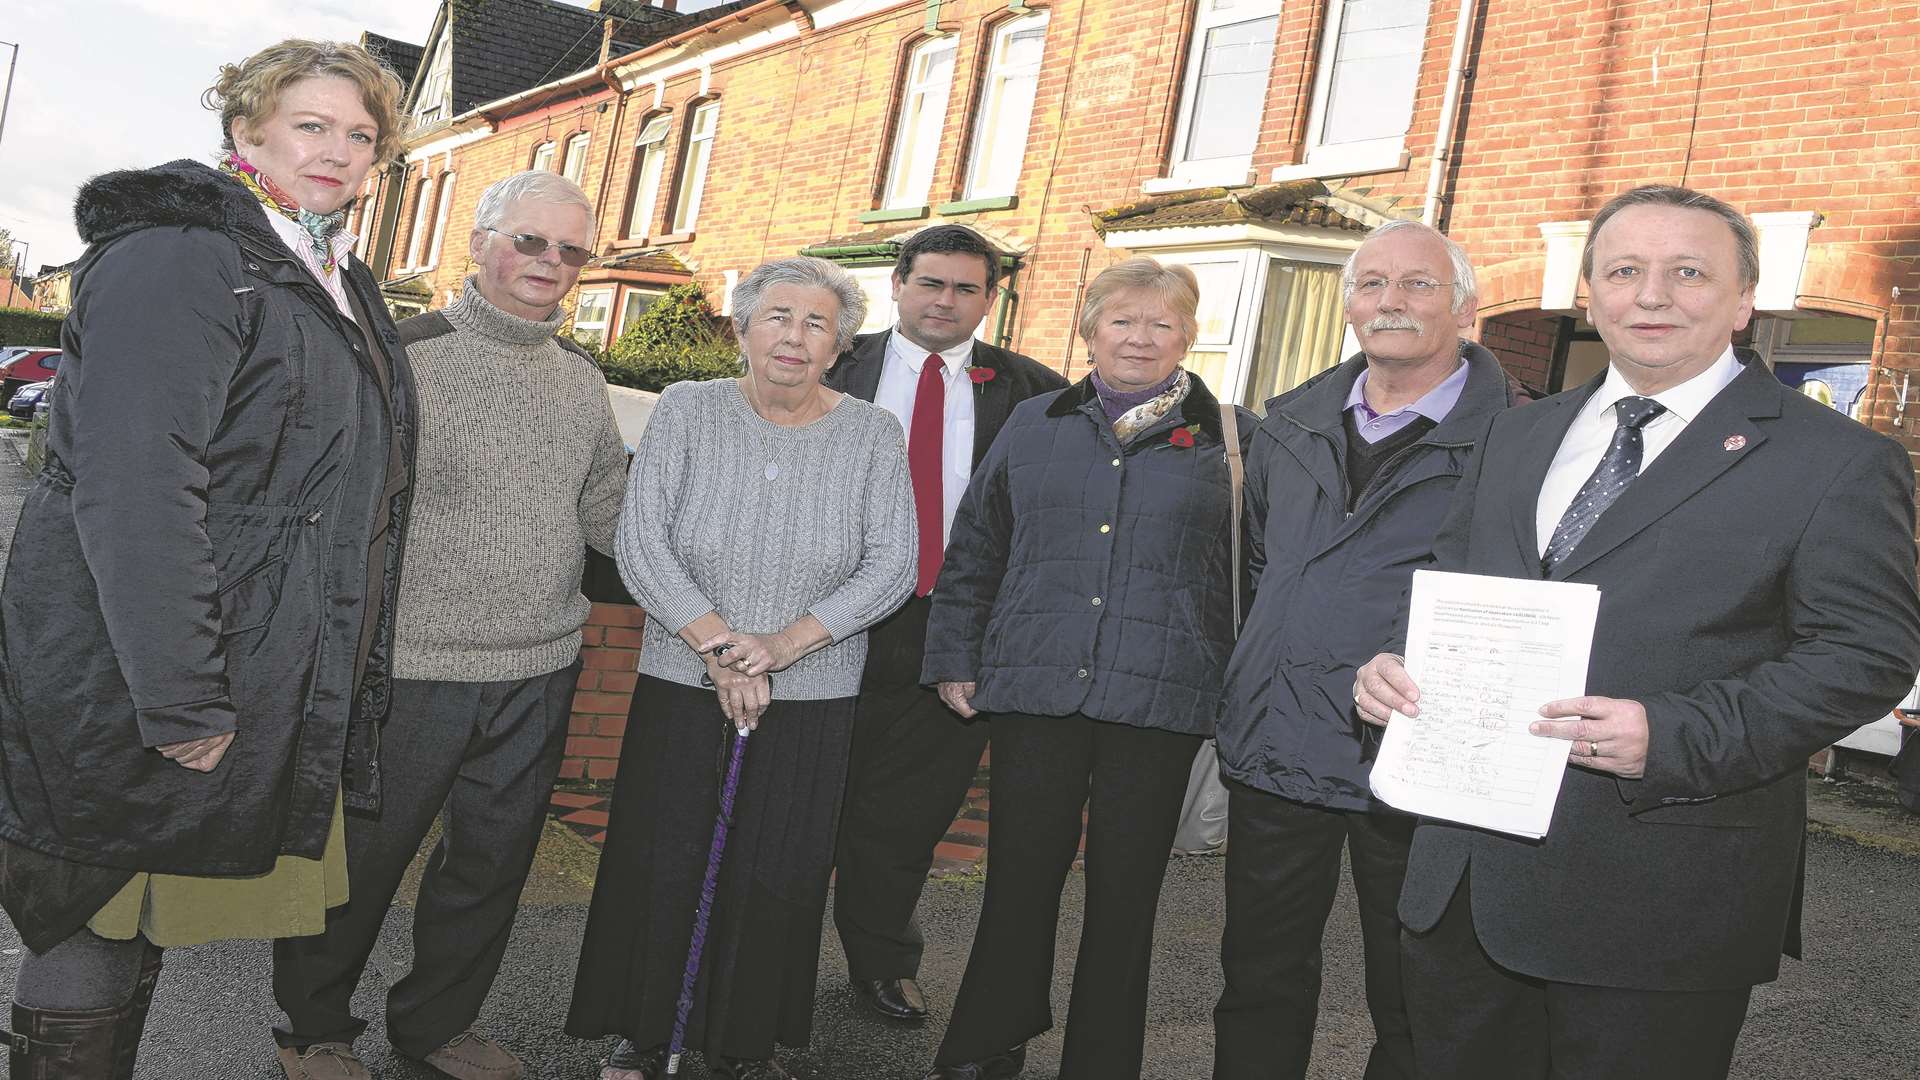 Kevin Wagstaffe, supported by other Beaver Road residents, has set up a petition against a proposed HMO